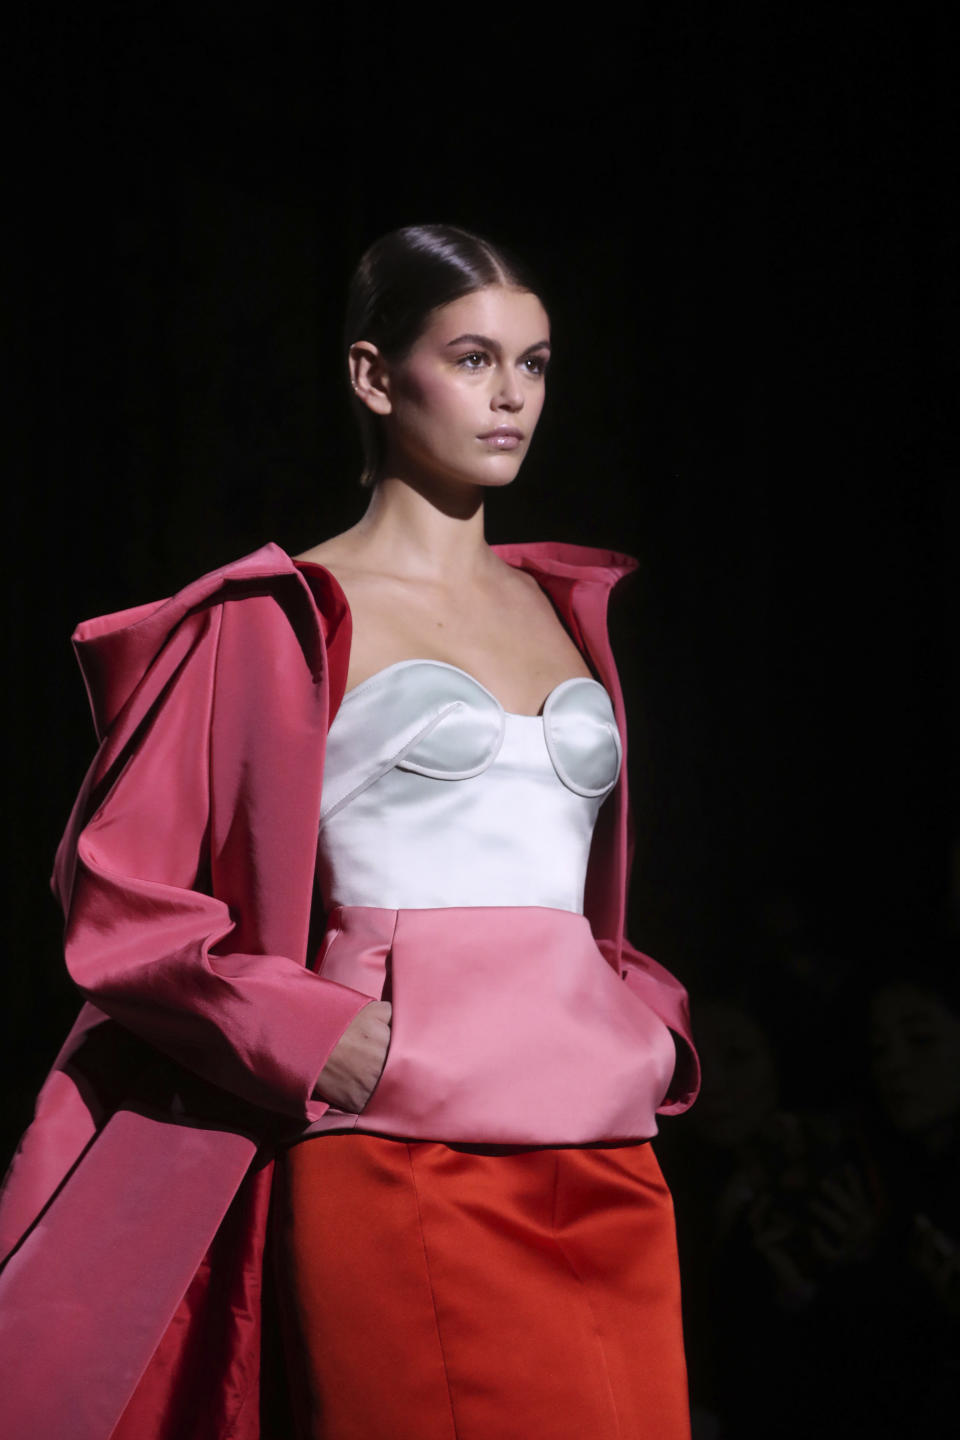 Model Kaia Gerber wears a creation for the Valentino Haute Couture Spring/Summer 2020 fashion collection presented Wednesday Jan. 22, 2020 in Paris. (AP Photo/Thibault Camus)